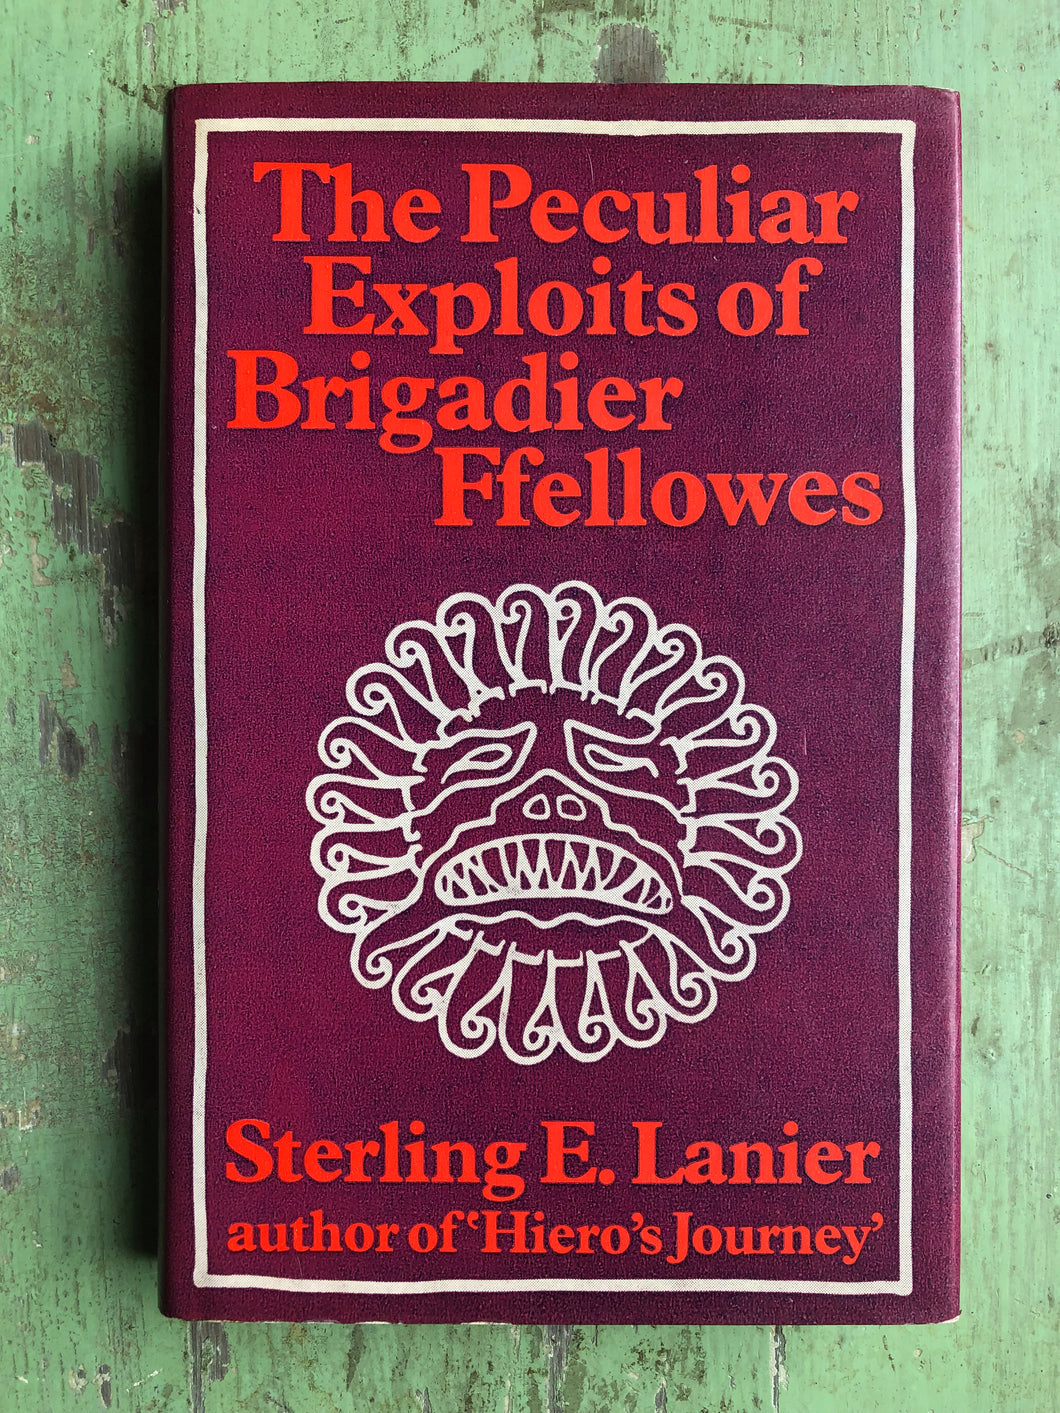 The Peculiar Exploits of Brigadier Ffellowes by Sterling E. Lanier